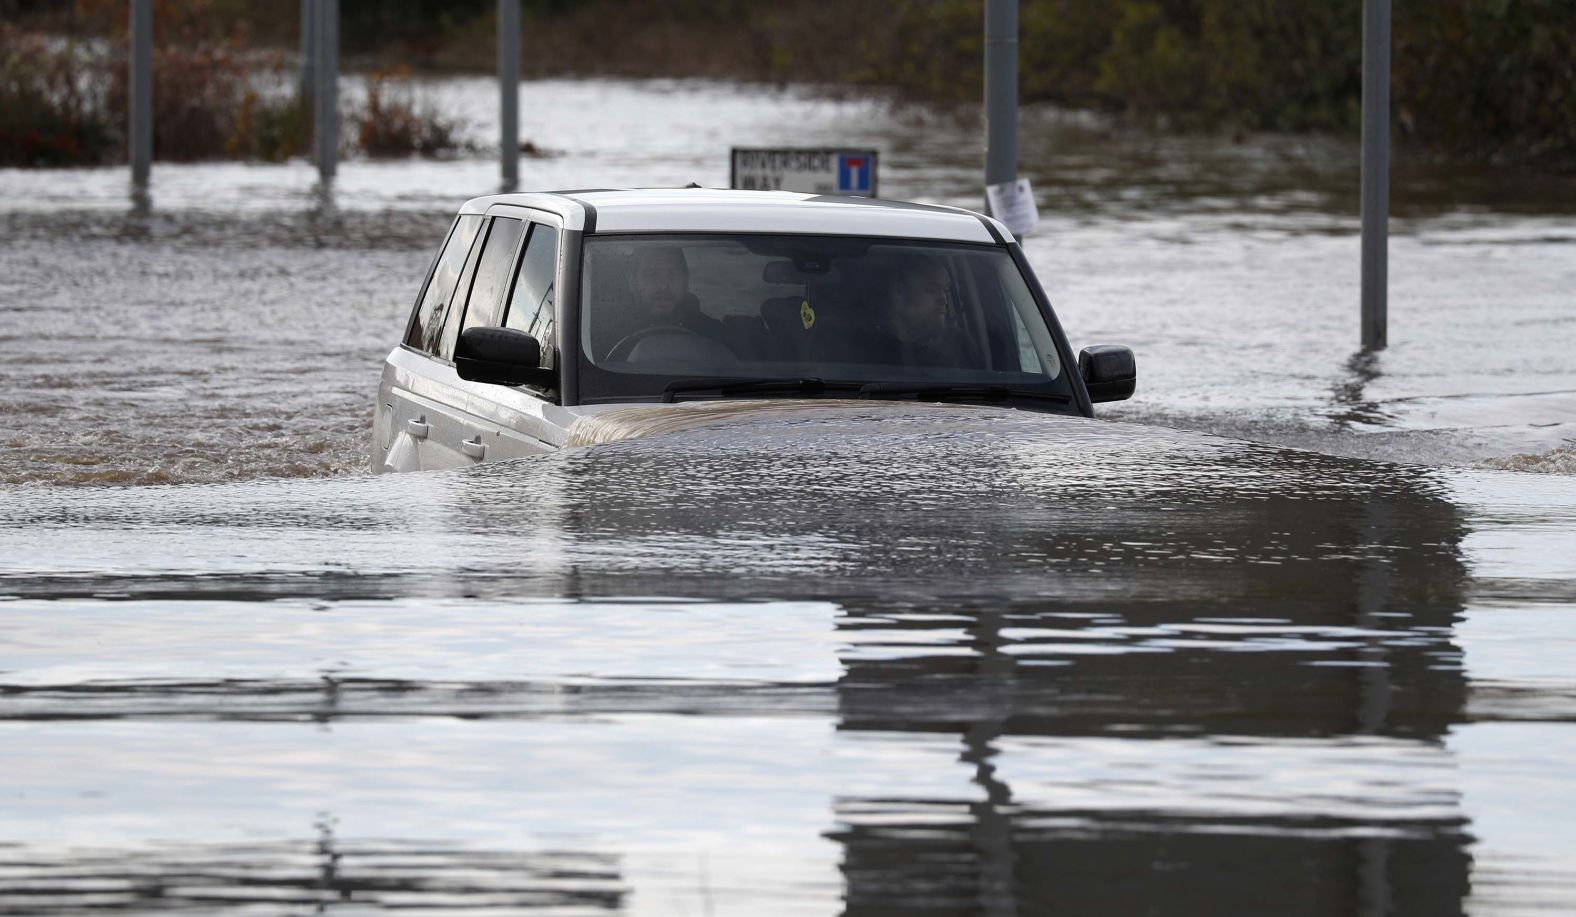 A vehicle is driven through flood waters after the River Don burst its banks on Friday, November 8 in Rotherham, United Kingdom.